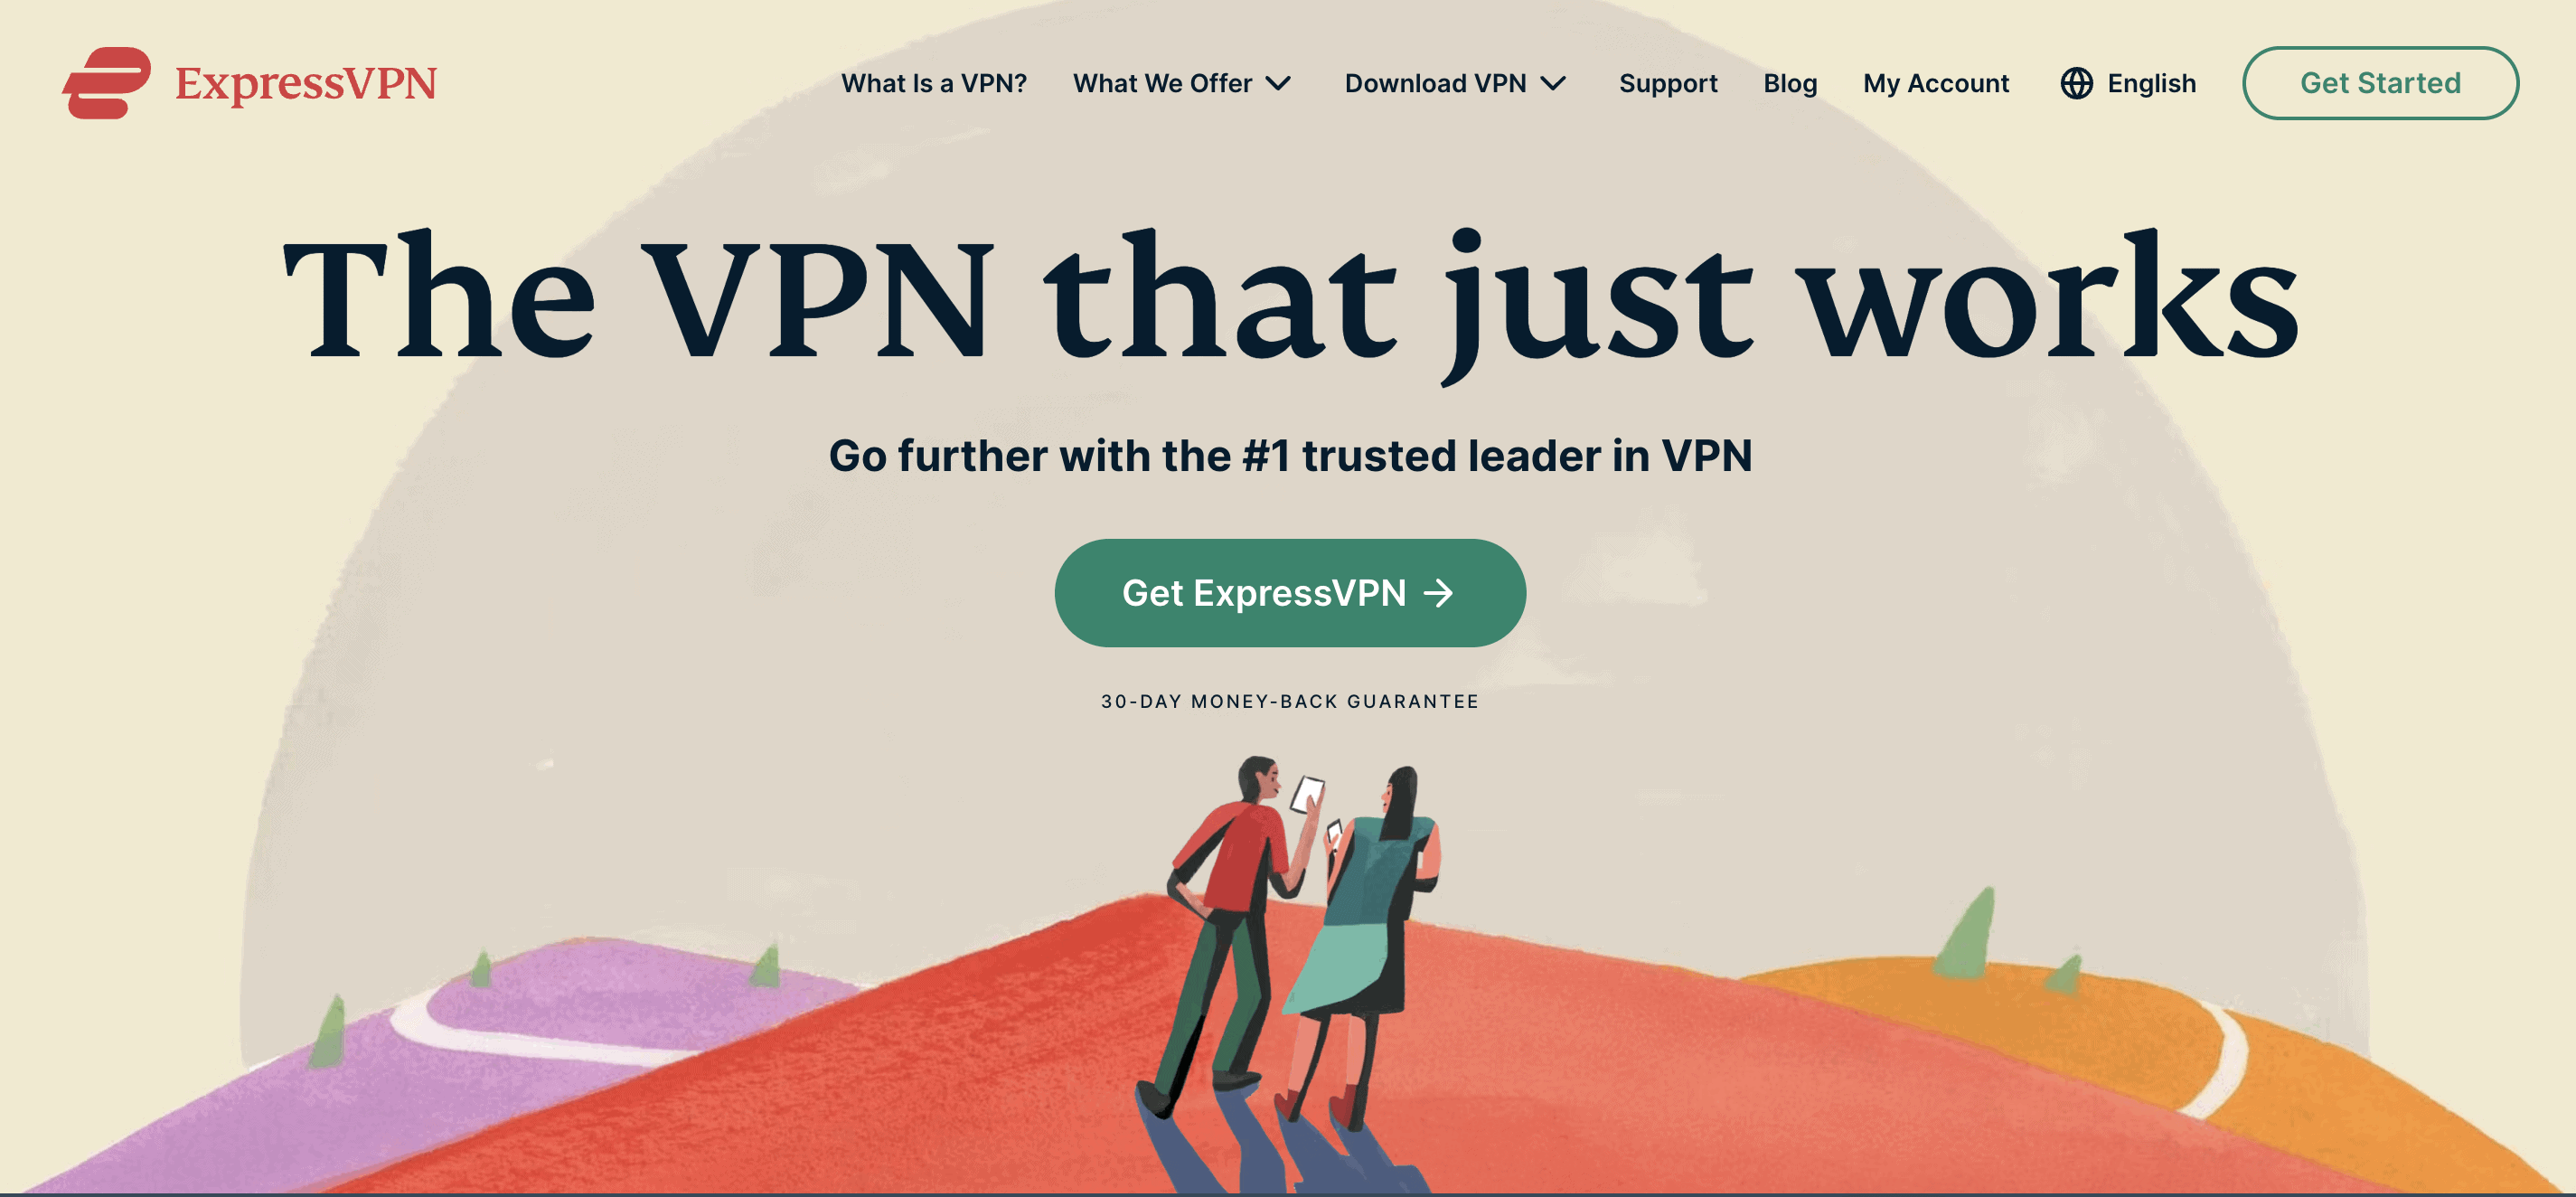 Introduction to ExpressVPN